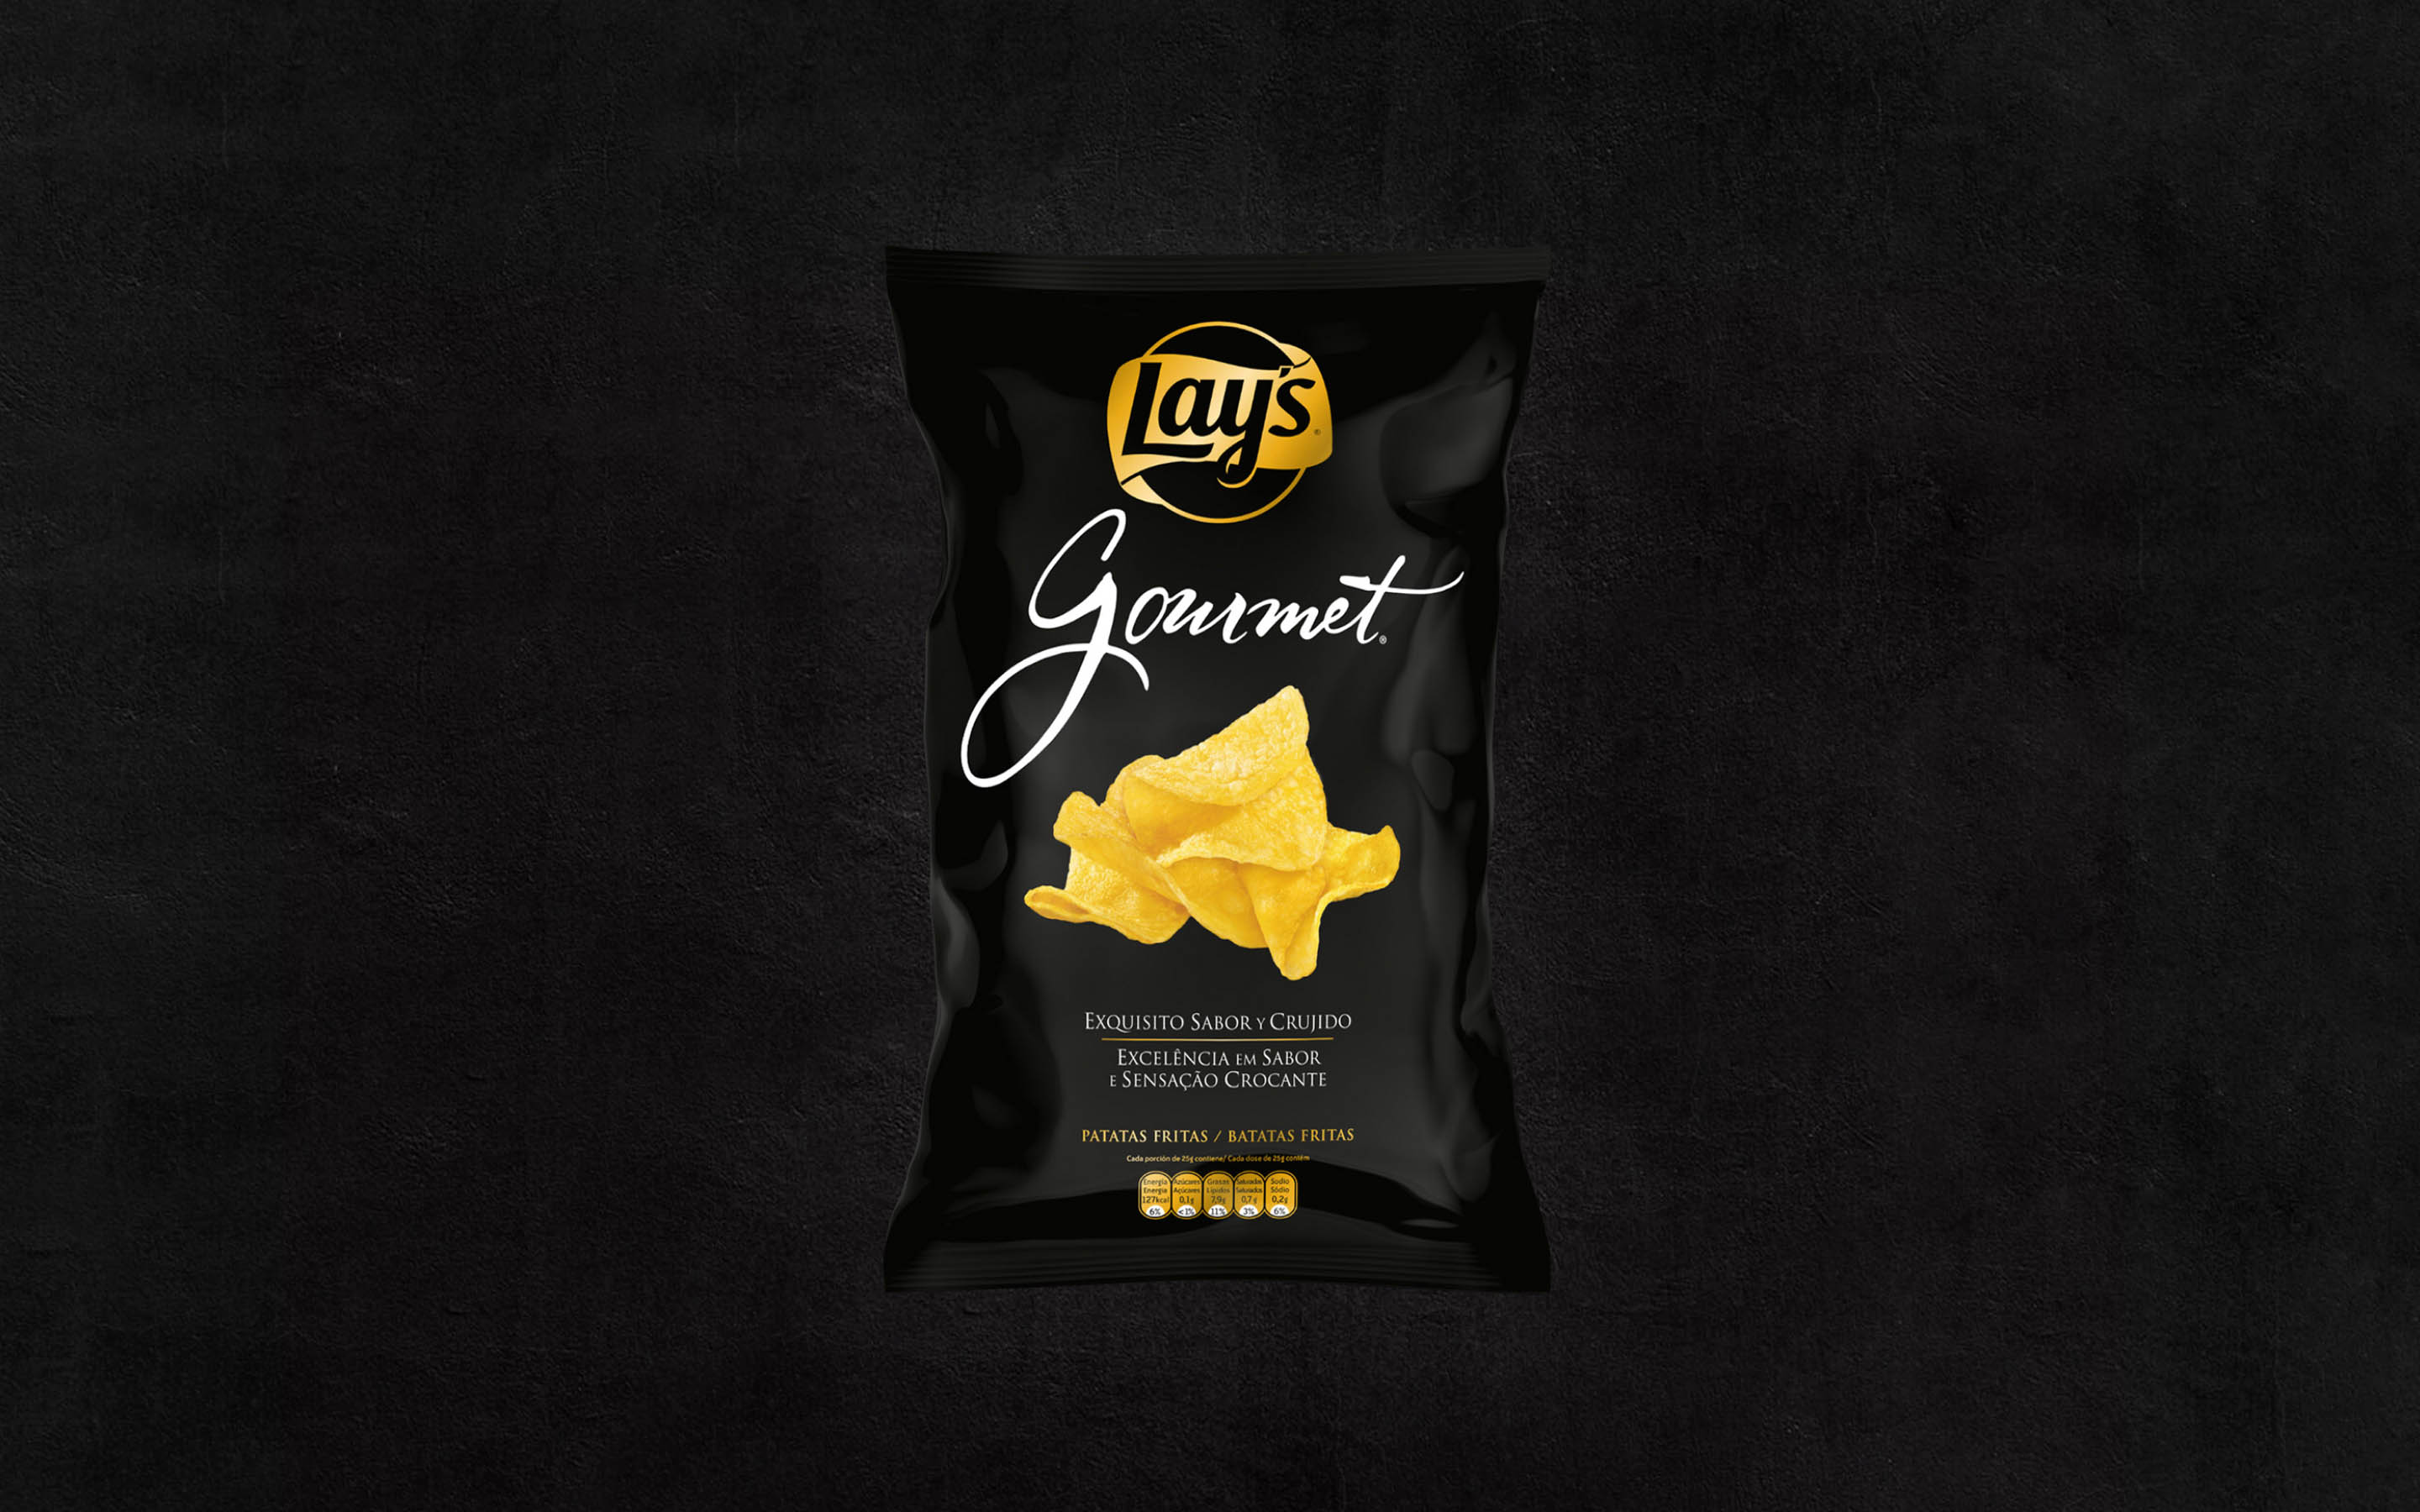 Lay’s is, with more than 80 years of experience, one of the world’s most recognized snack brands. The constant expansion of its product range and its high quality make it the respected and successful global brand that it is today.
